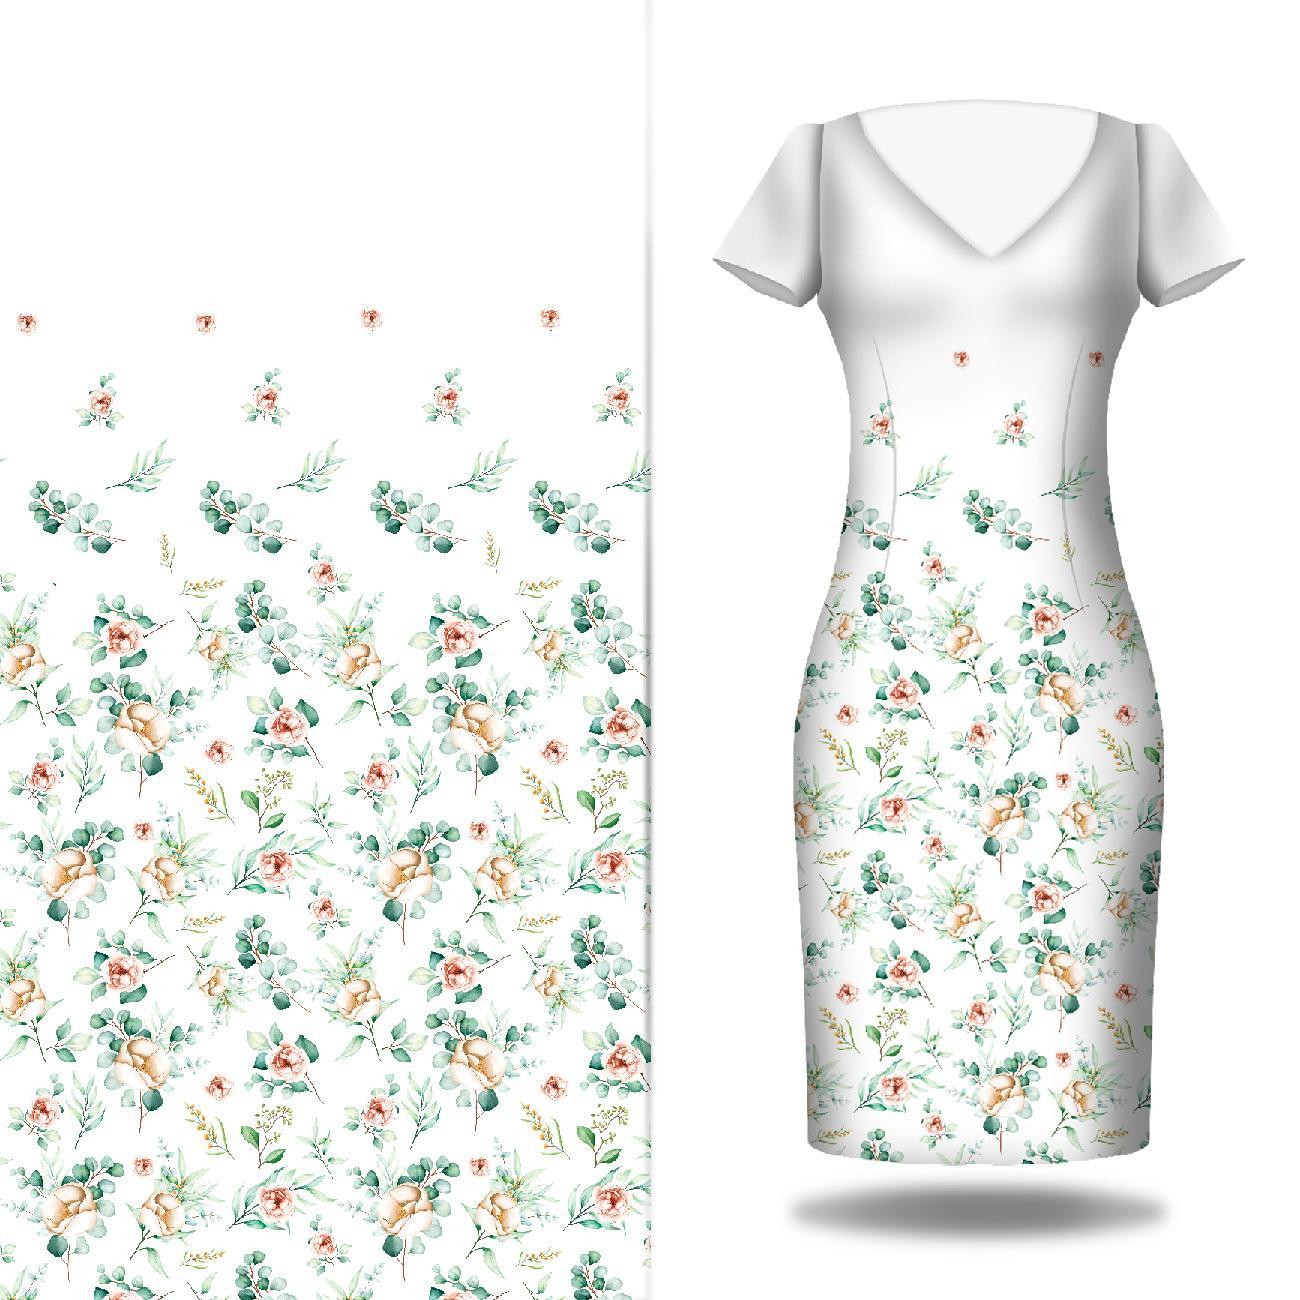 ROSES AND LEAVES PAT. 2 - dress panel single jersey 120g